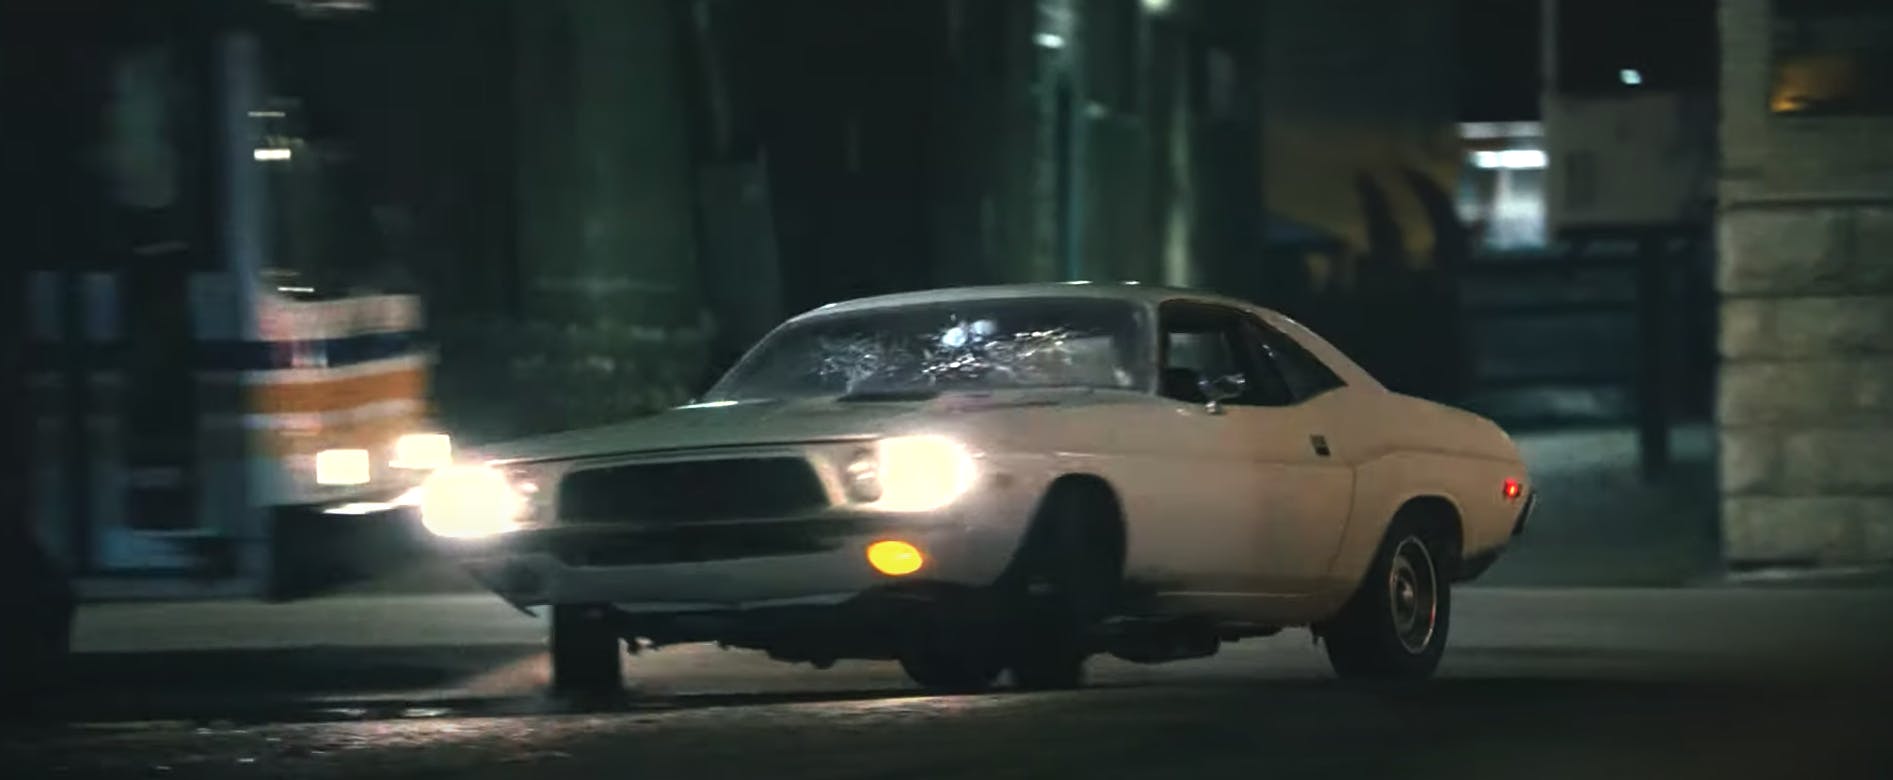 Nobody Film Bob Odenkirk 1972 Dodge Challenger driving action frontal